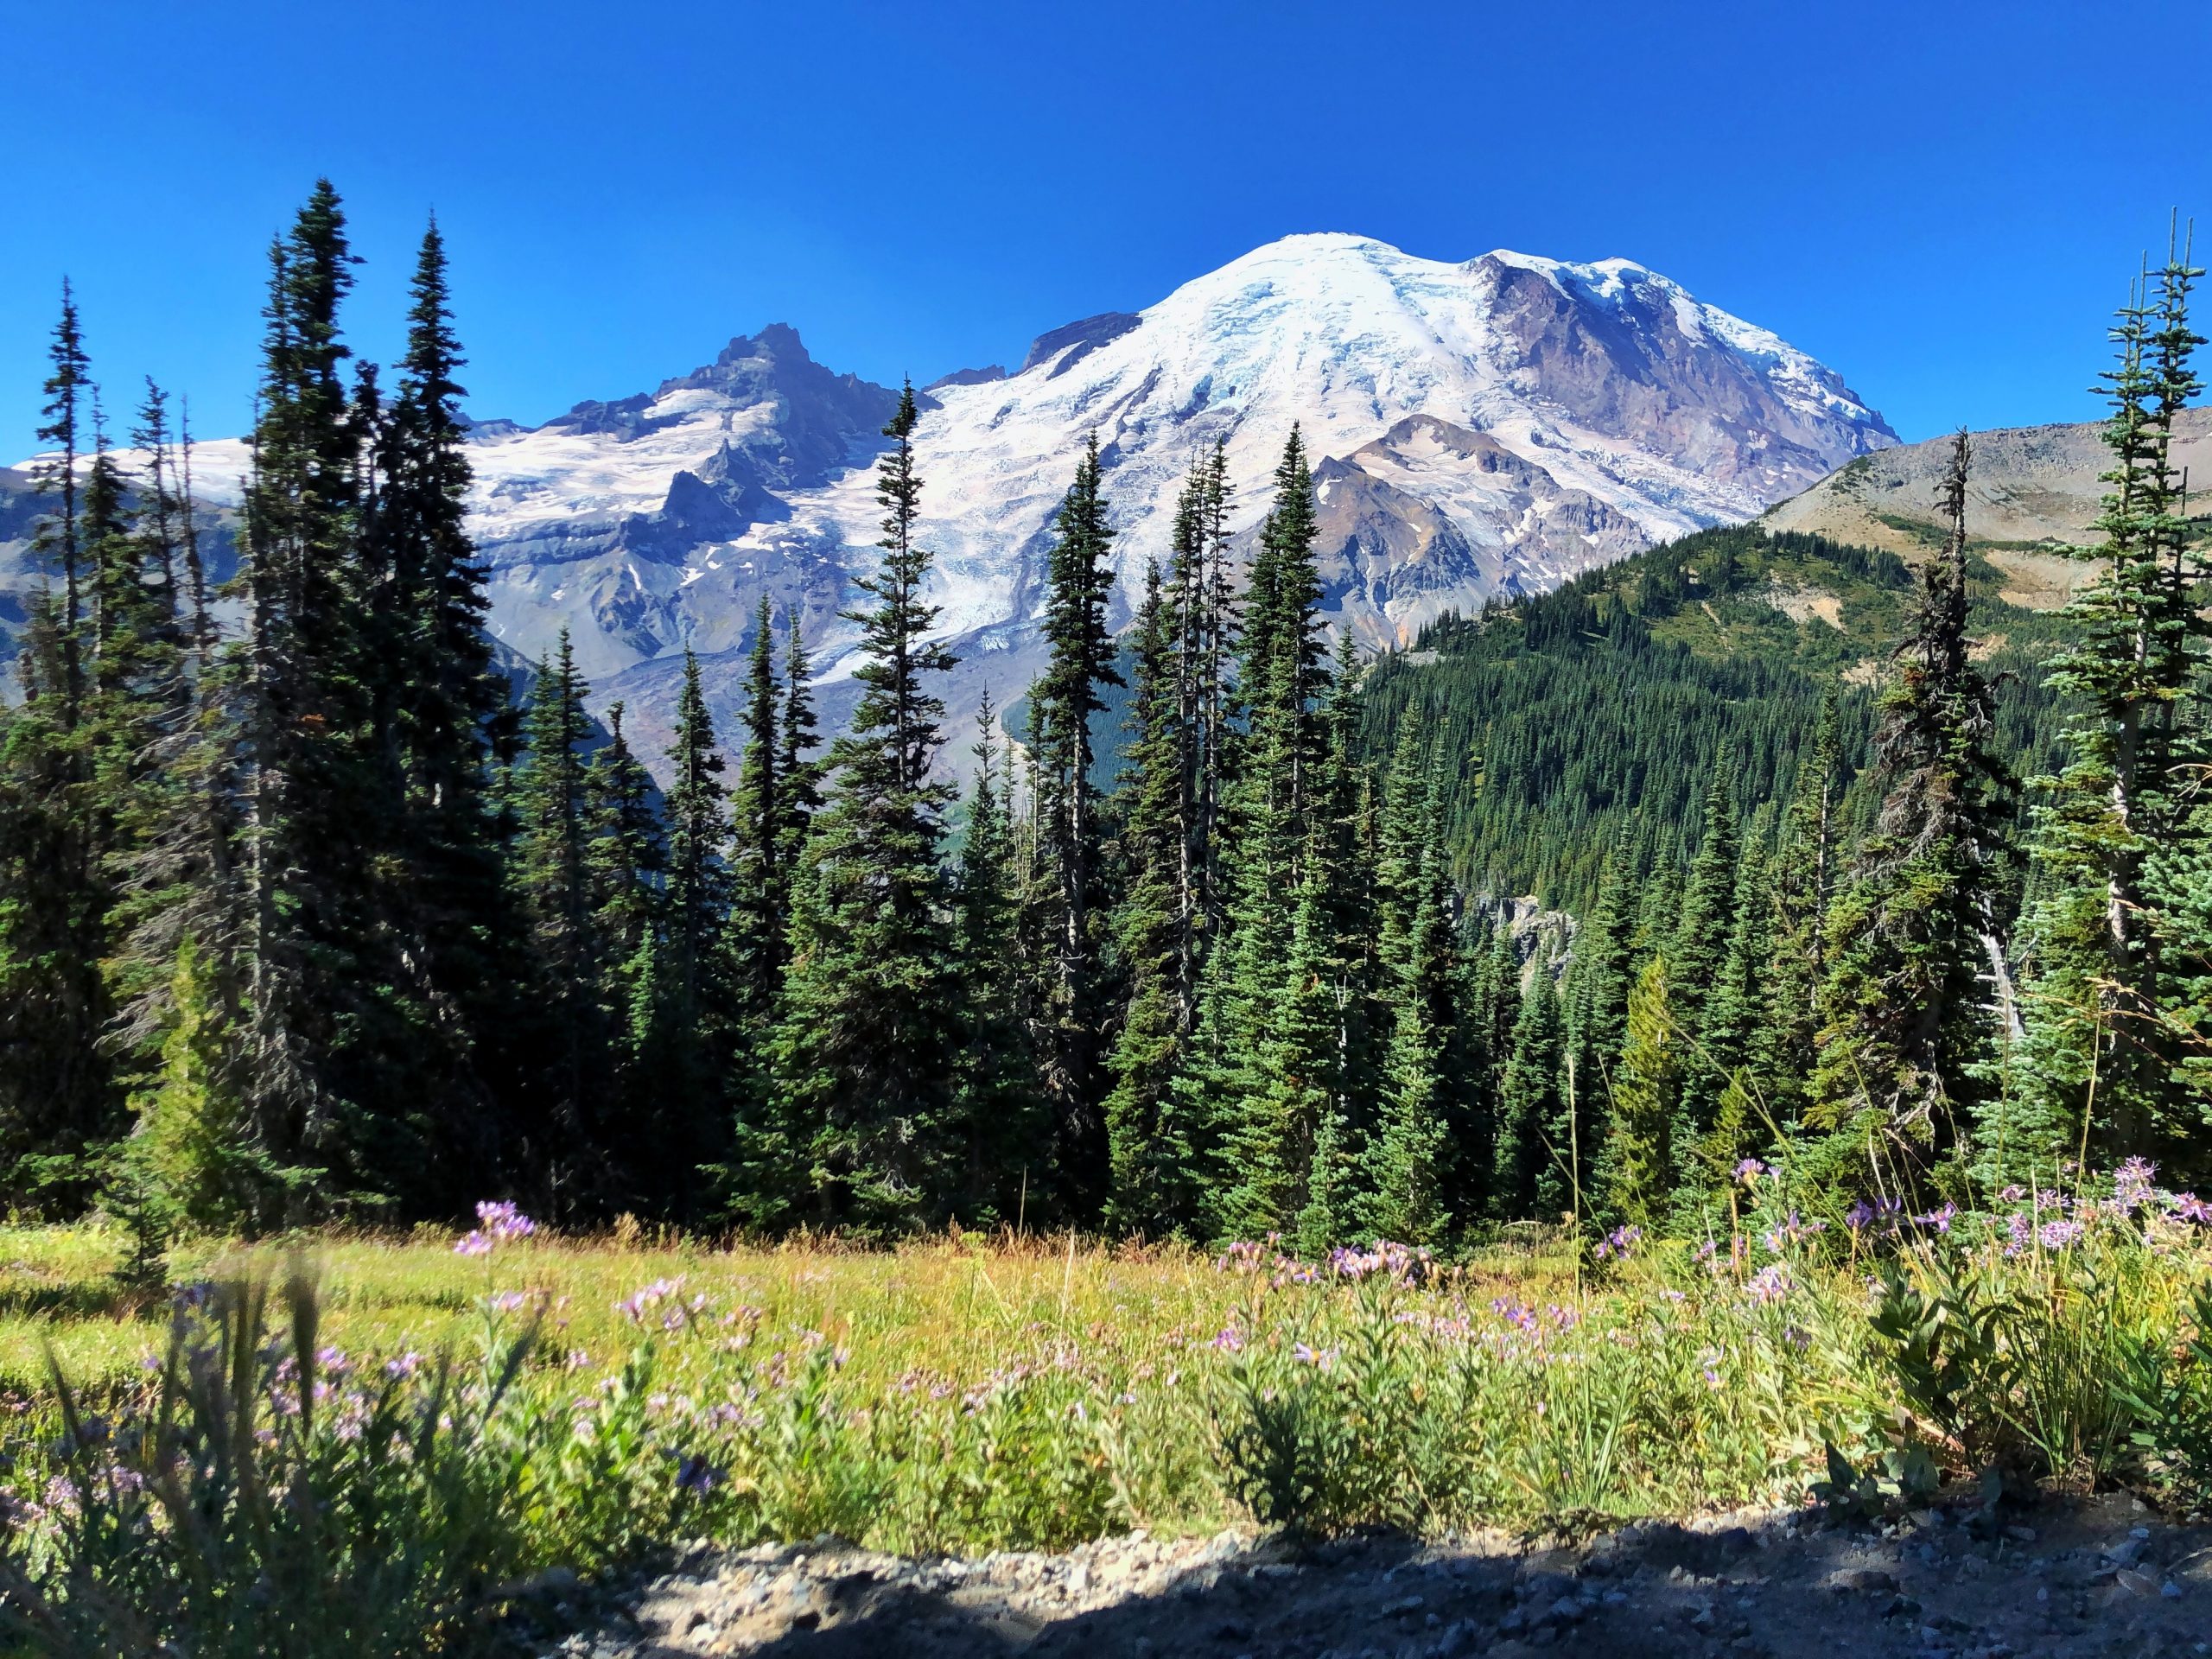 Image of Mount Rainier in the background with grassy fields in the foreground.